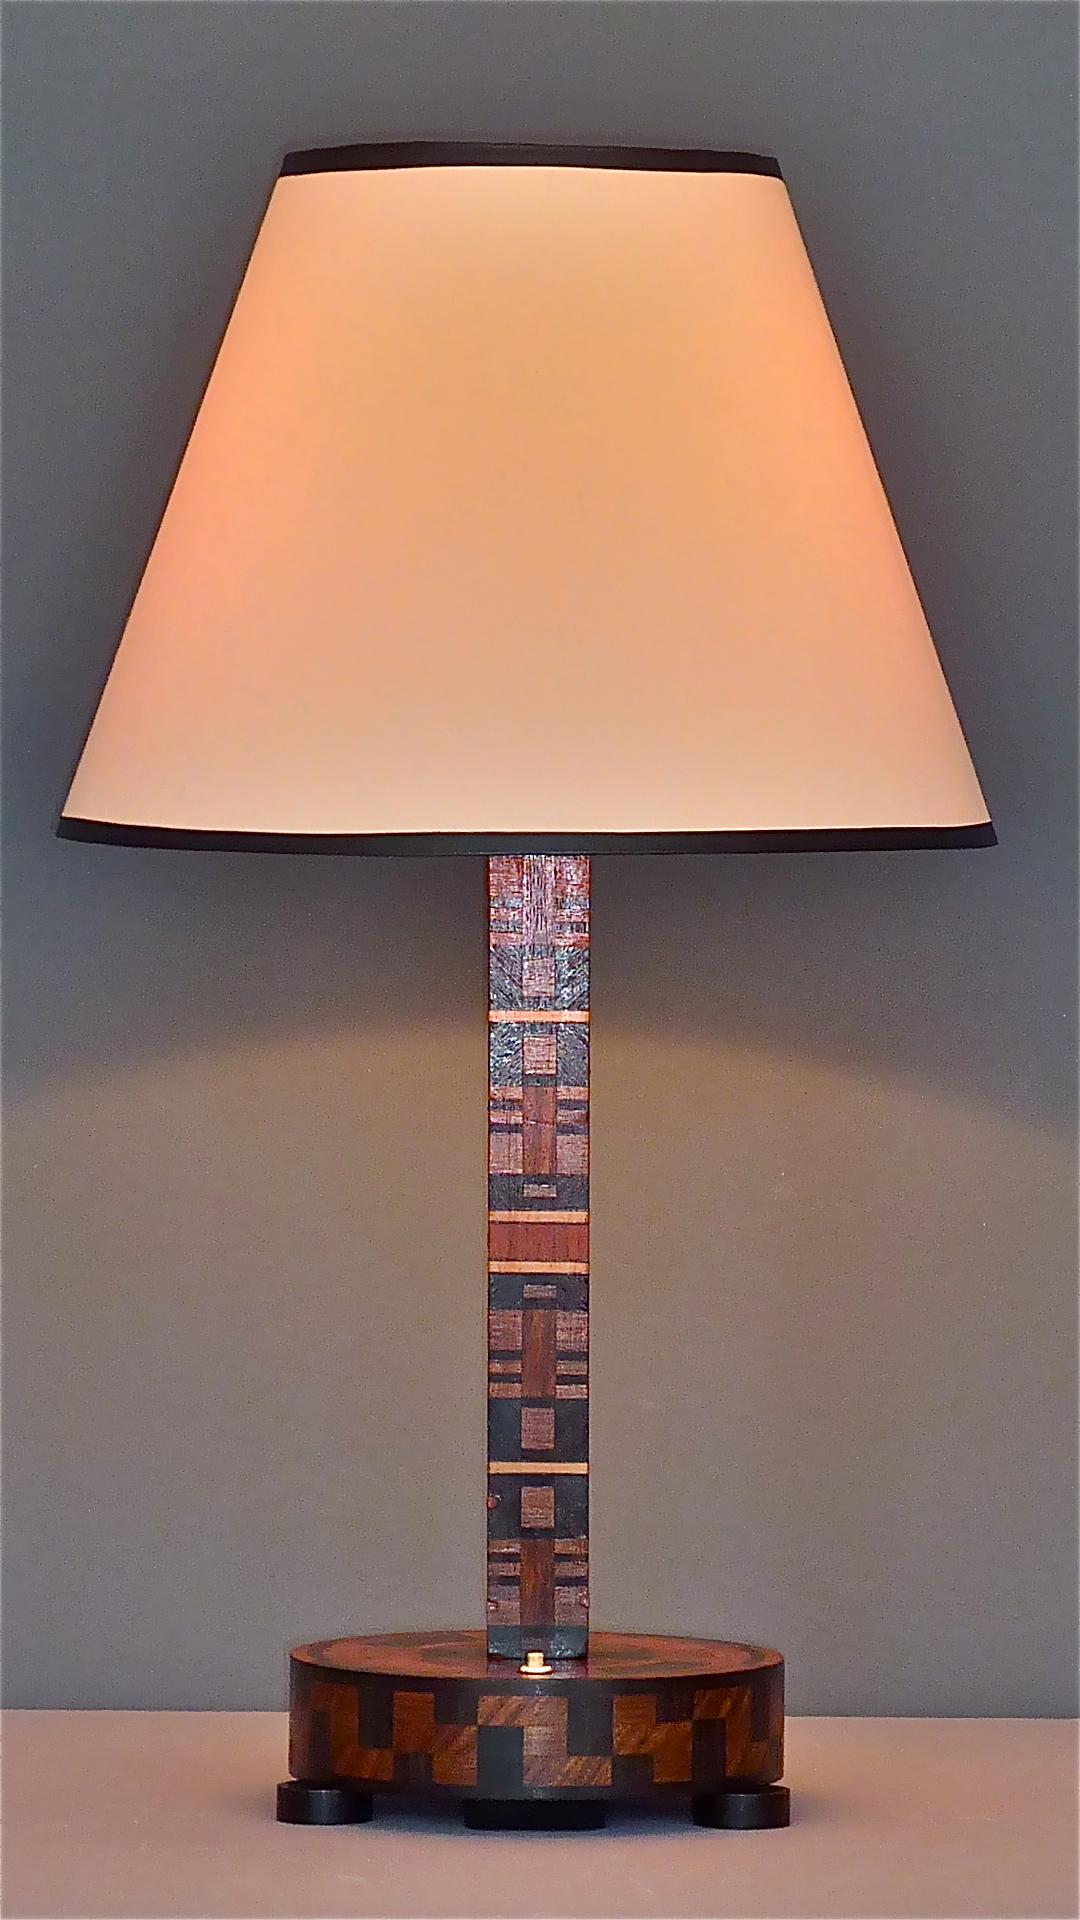 Antique Art Deco / Bauhaus wood marquetry table lamp which can be dated France or Germany, circa 1920-1930. The lamp base has a wonderful exciting geometric alternating pattern of dark brown and blonde fruitwood, an integrated switch within the drum